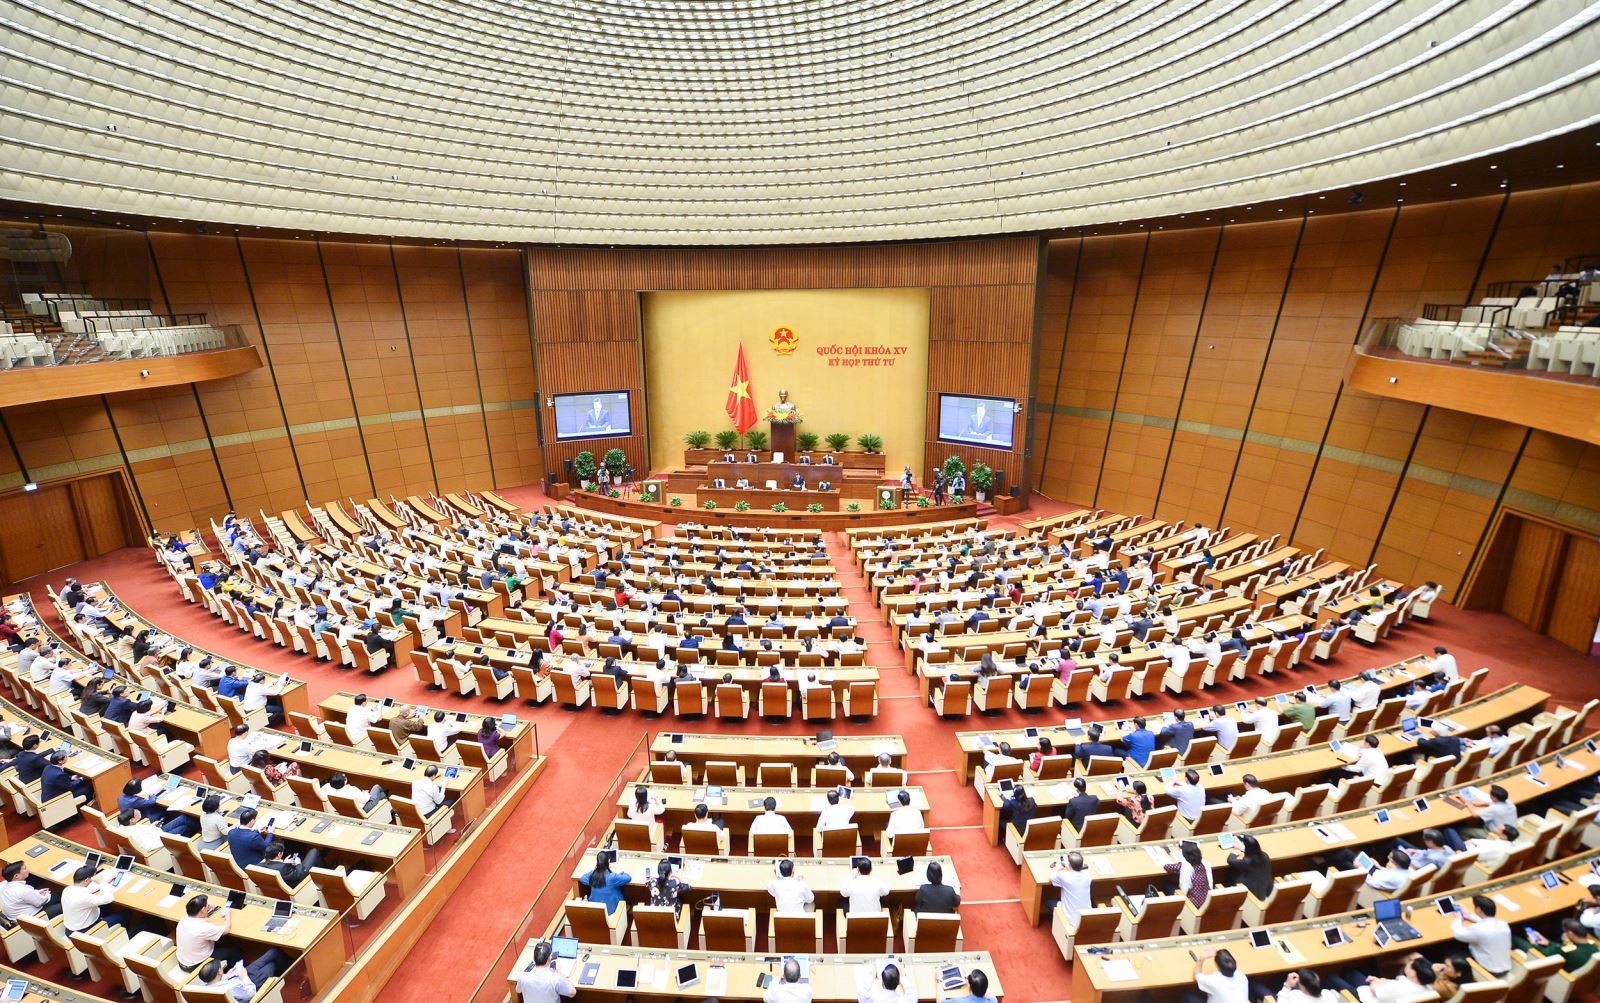 Procedures of the Standing Committee of the National Assembly for reviewing and providing opinions on bills and draft resolutions of the National Assembly of Vietnam